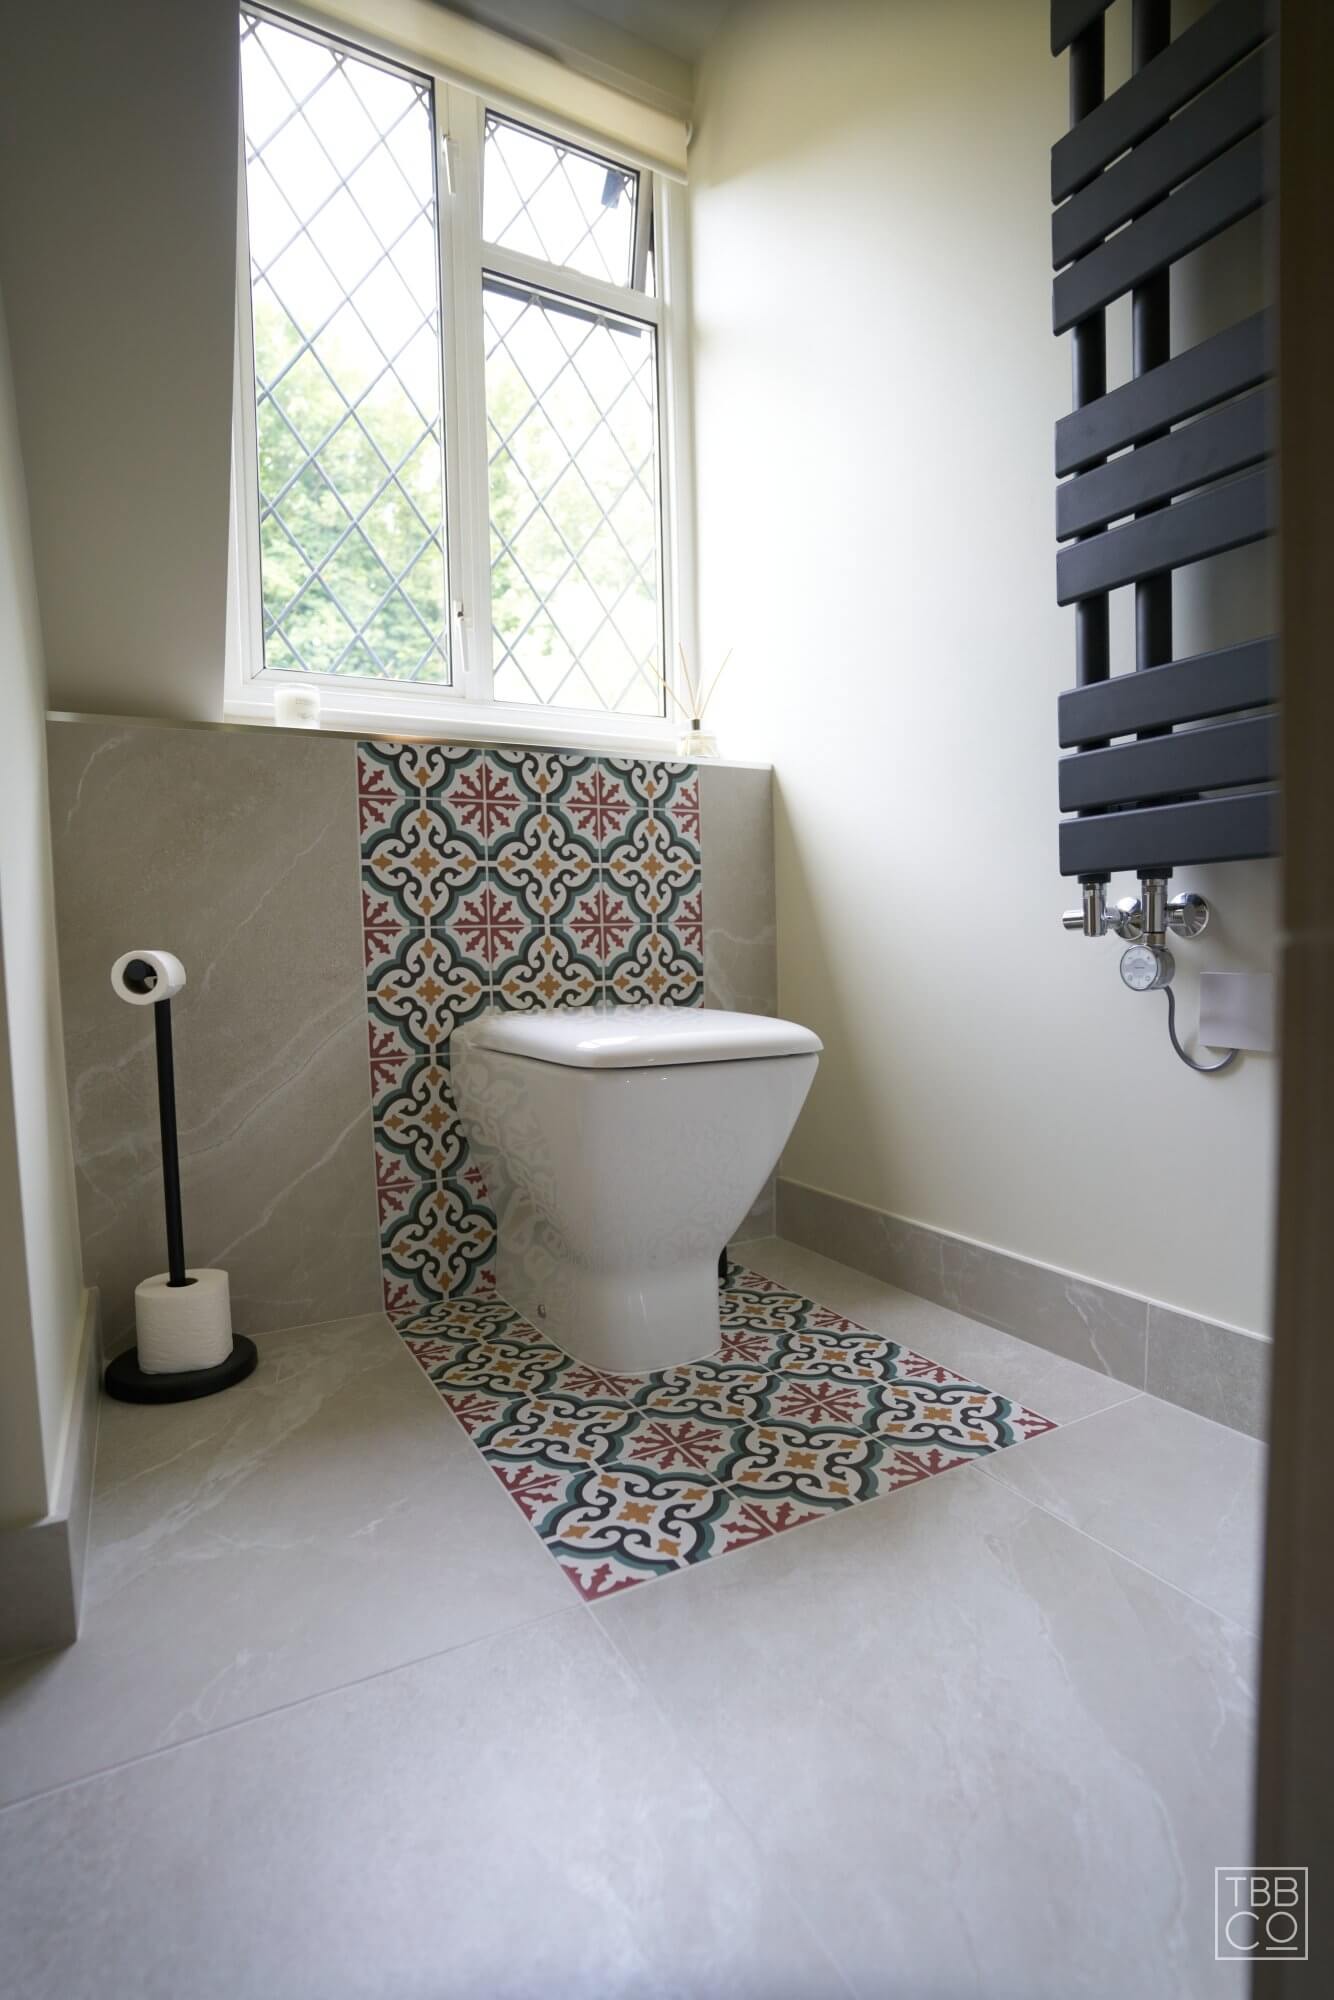 Floorstanding toilet with feature patterned tiles